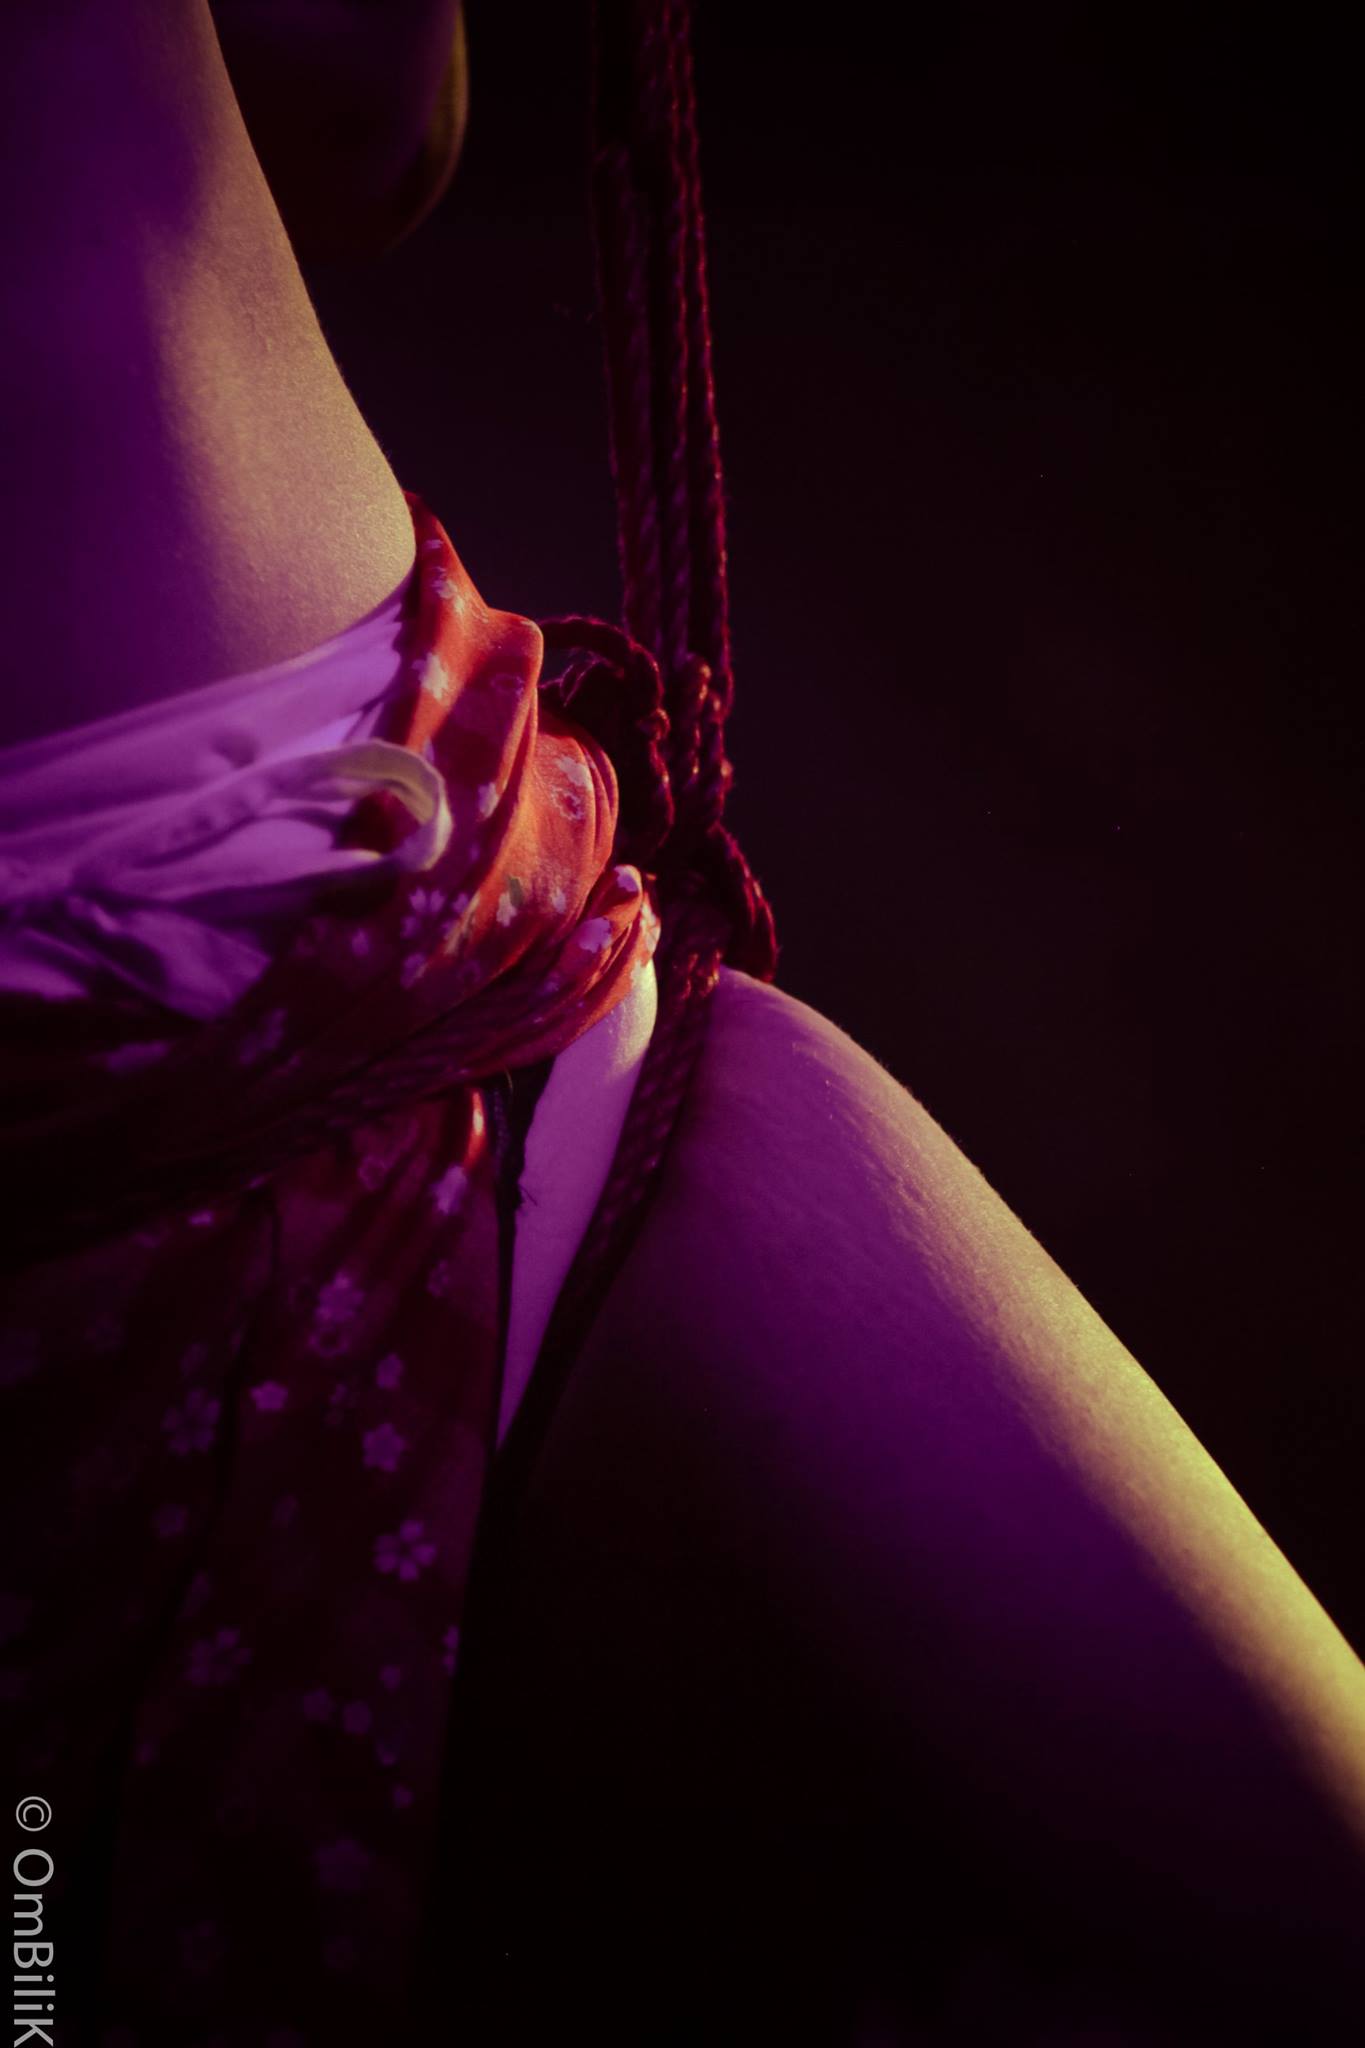 Shibari Suspension Bondage Show By Wykd Dave And Clover At Lust Factory In Geneva Switzerland 2015